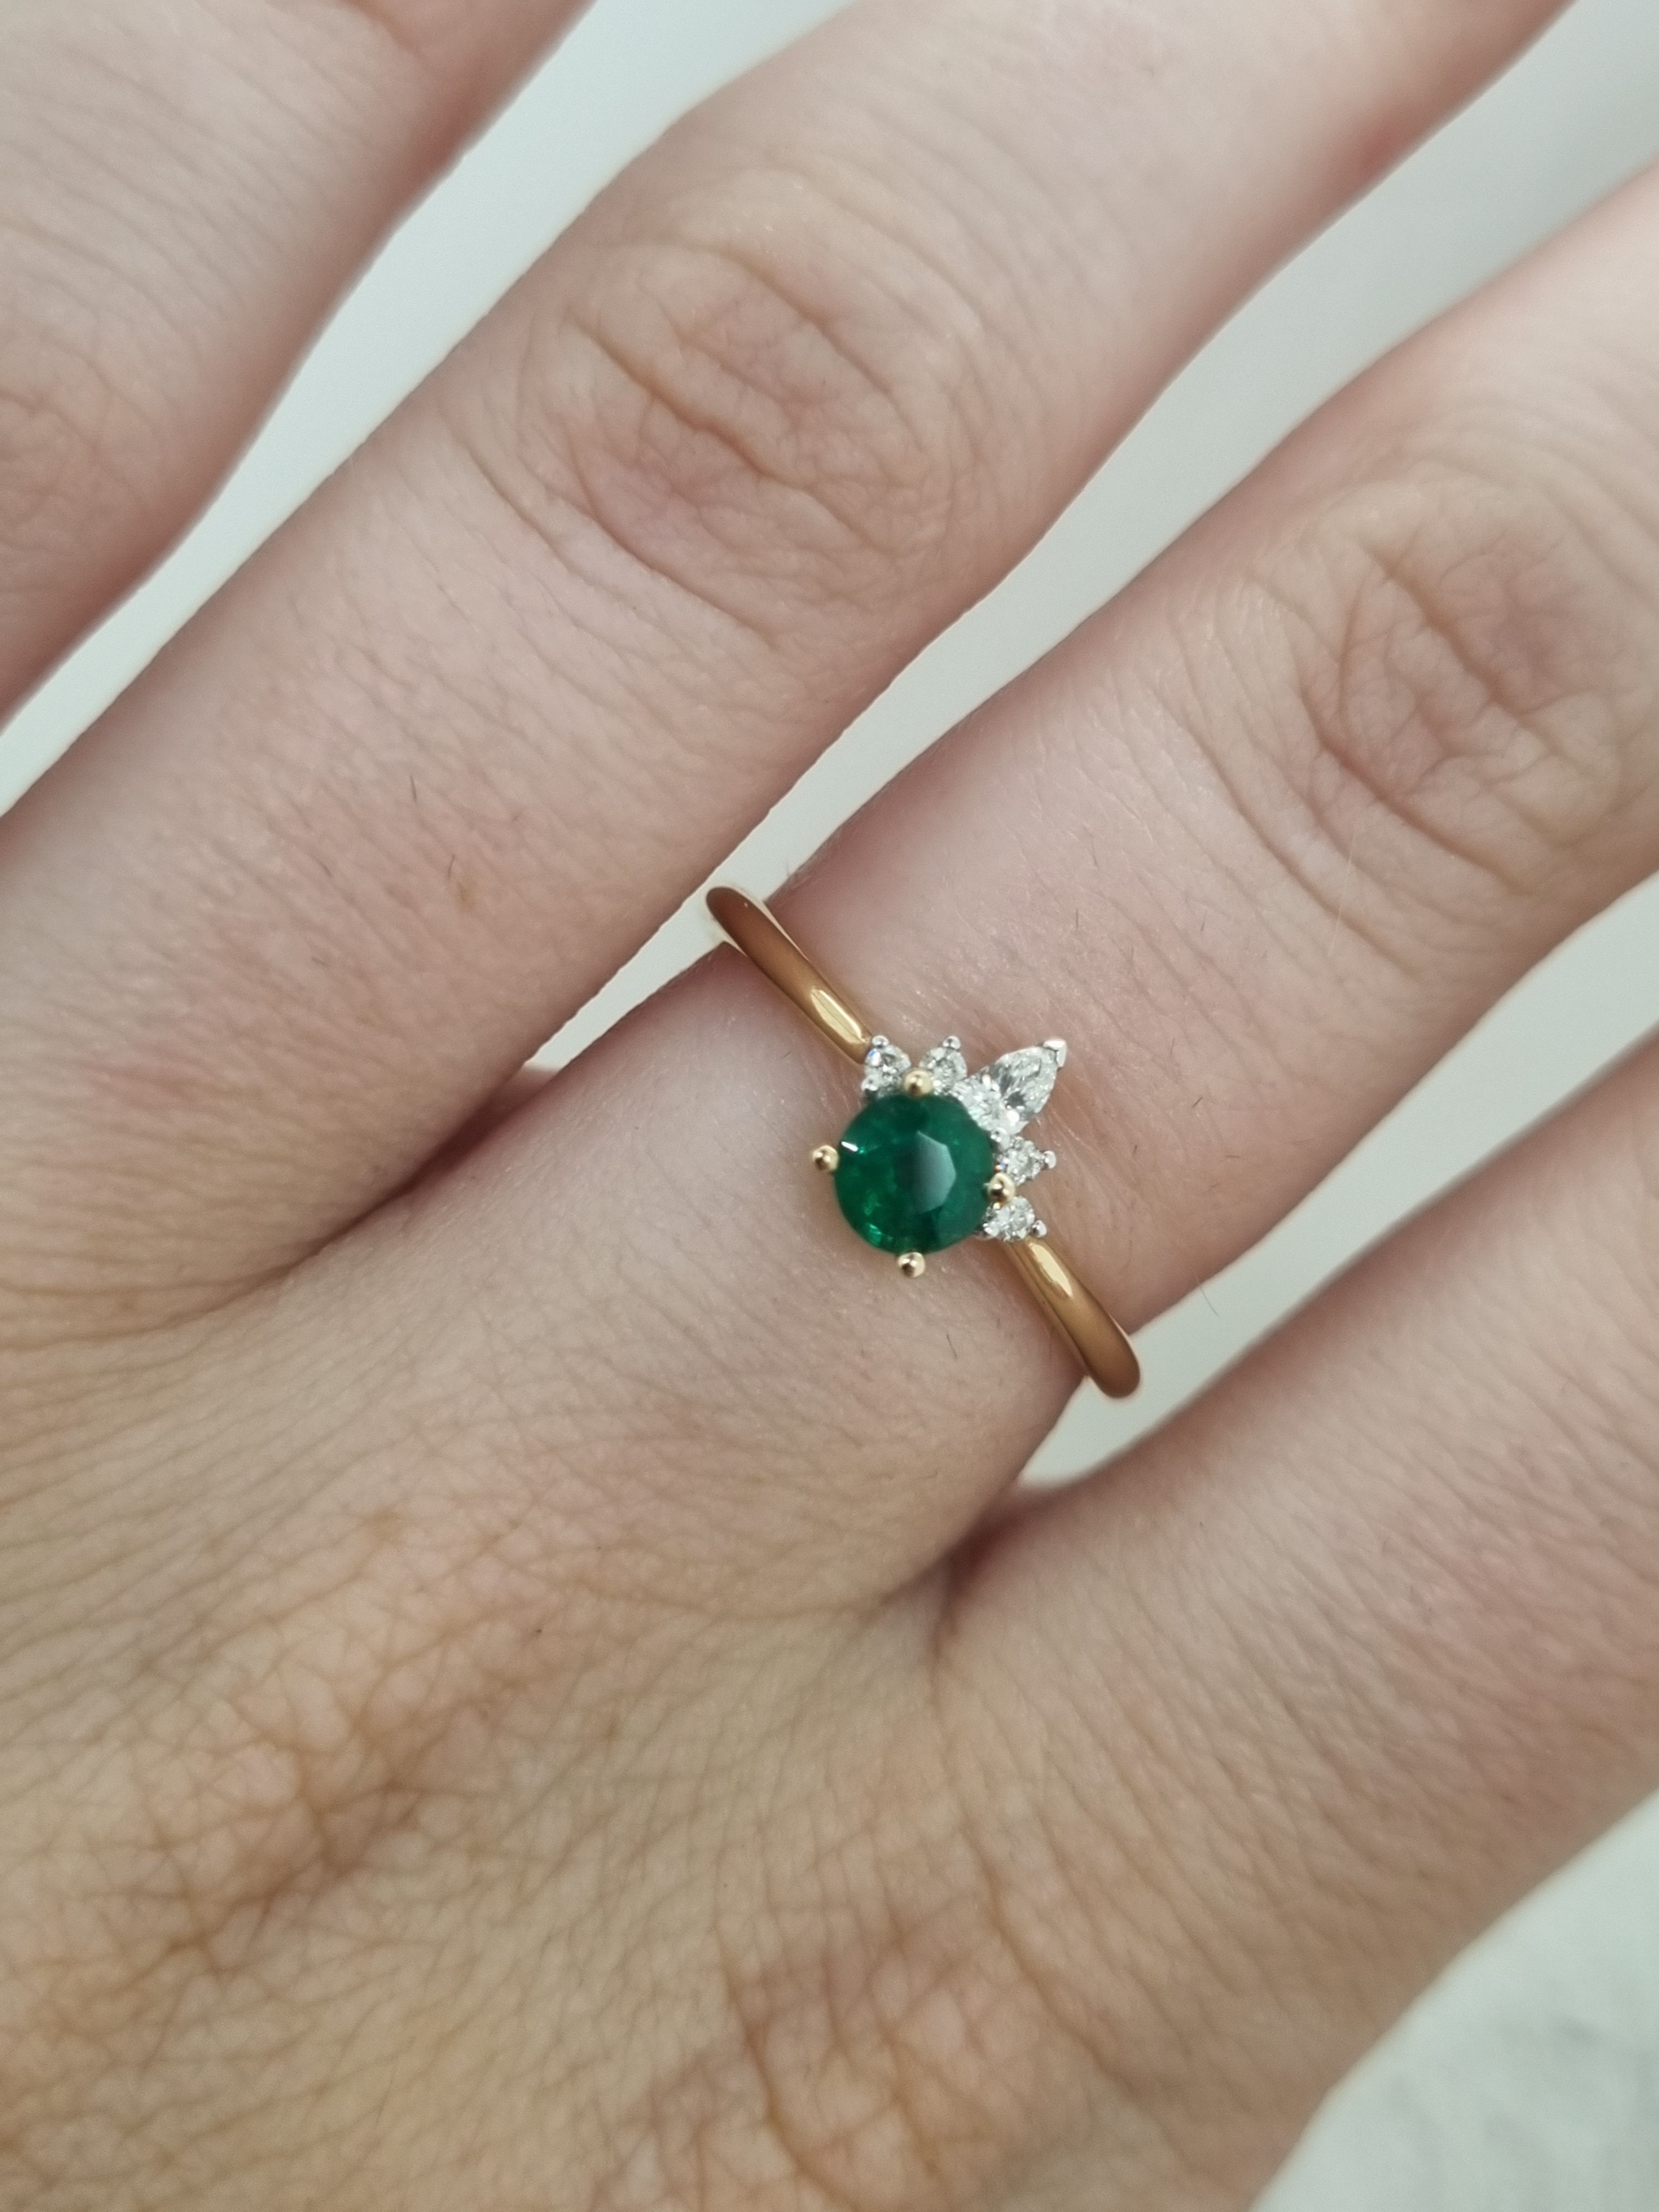 9ct Yellow gold Emerald and Diamond ring